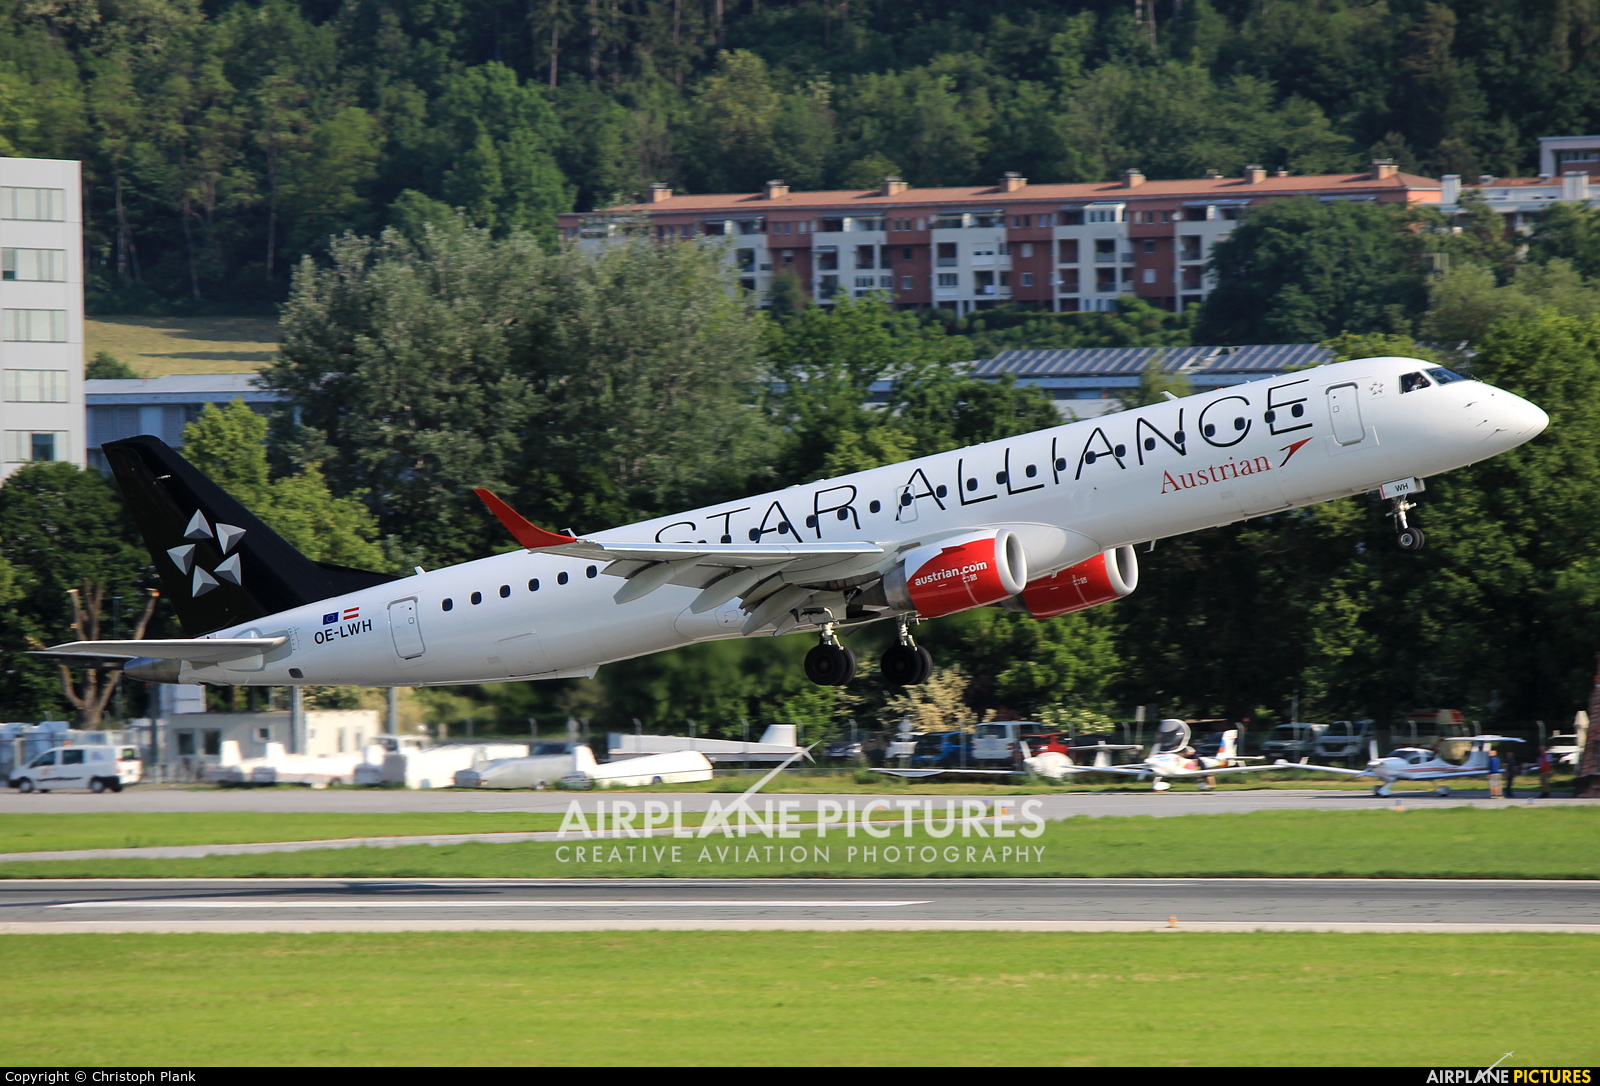 Austrian Airlines/Arrows/Tyrolean OE-LWH aircraft at Innsbruck